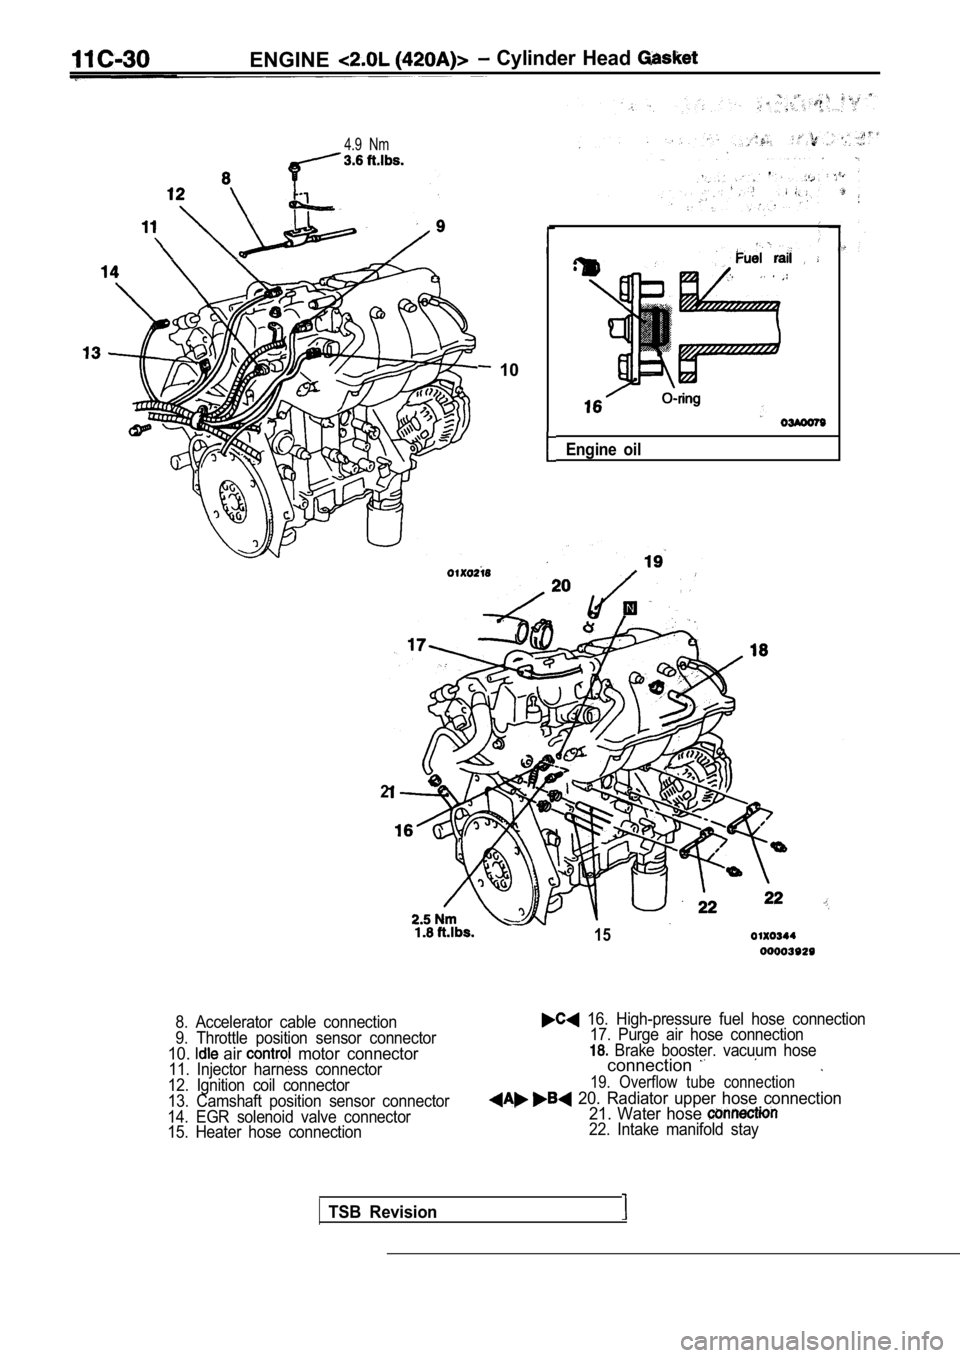 MITSUBISHI SPYDER 1990  Service Repair Manual ENGINE  Cylinder  Head 
4.9  Nm
  10
Engine  oil
TSB  Revision
2
15
8.  Accelerator  cable  connection 
9.  Throttle  position  sensor  connector
10. air   motor  connector11.  Injector  harness  conn